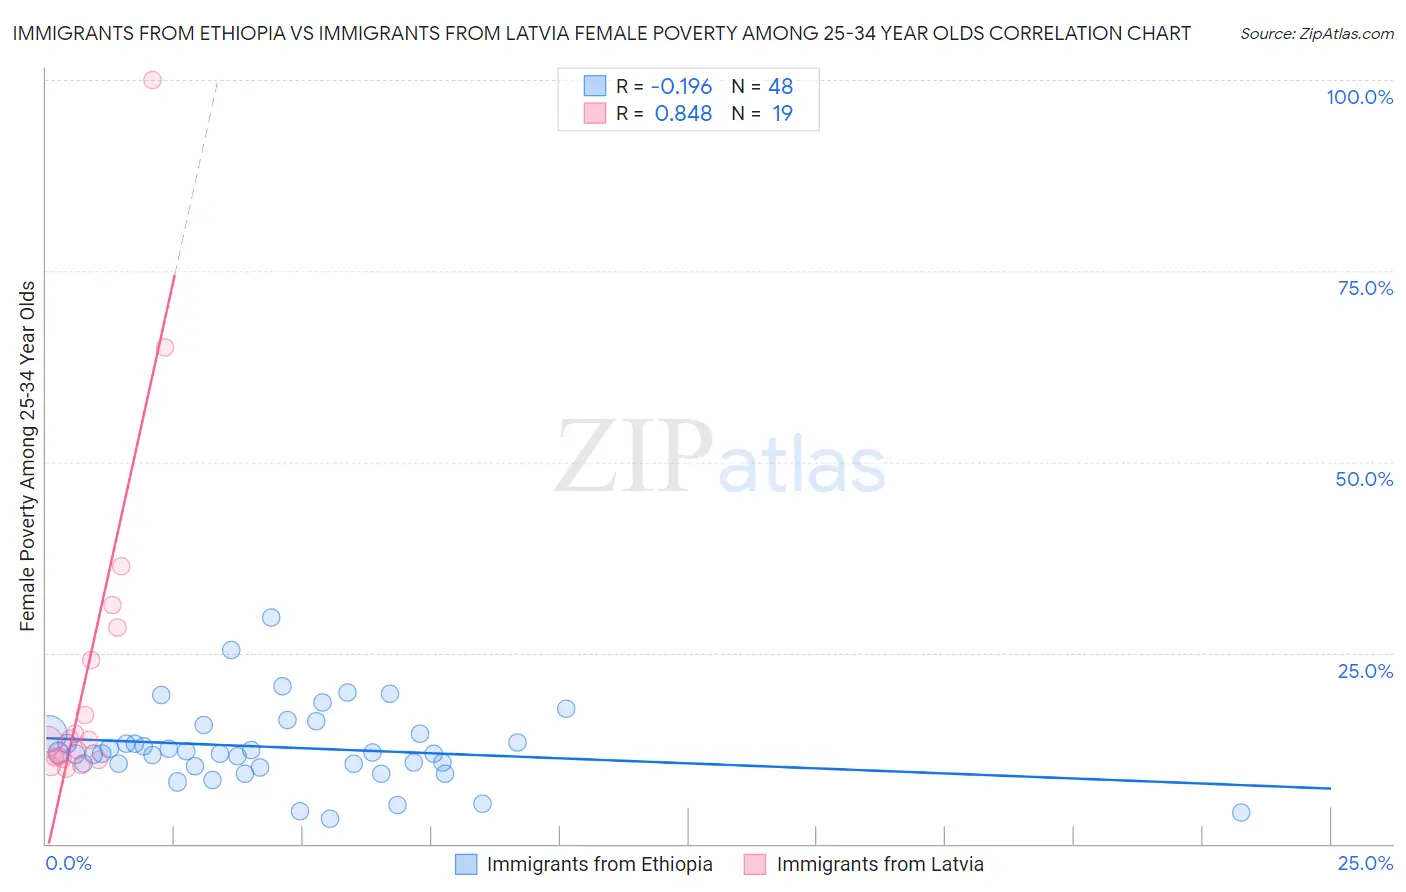 Immigrants from Ethiopia vs Immigrants from Latvia Female Poverty Among 25-34 Year Olds